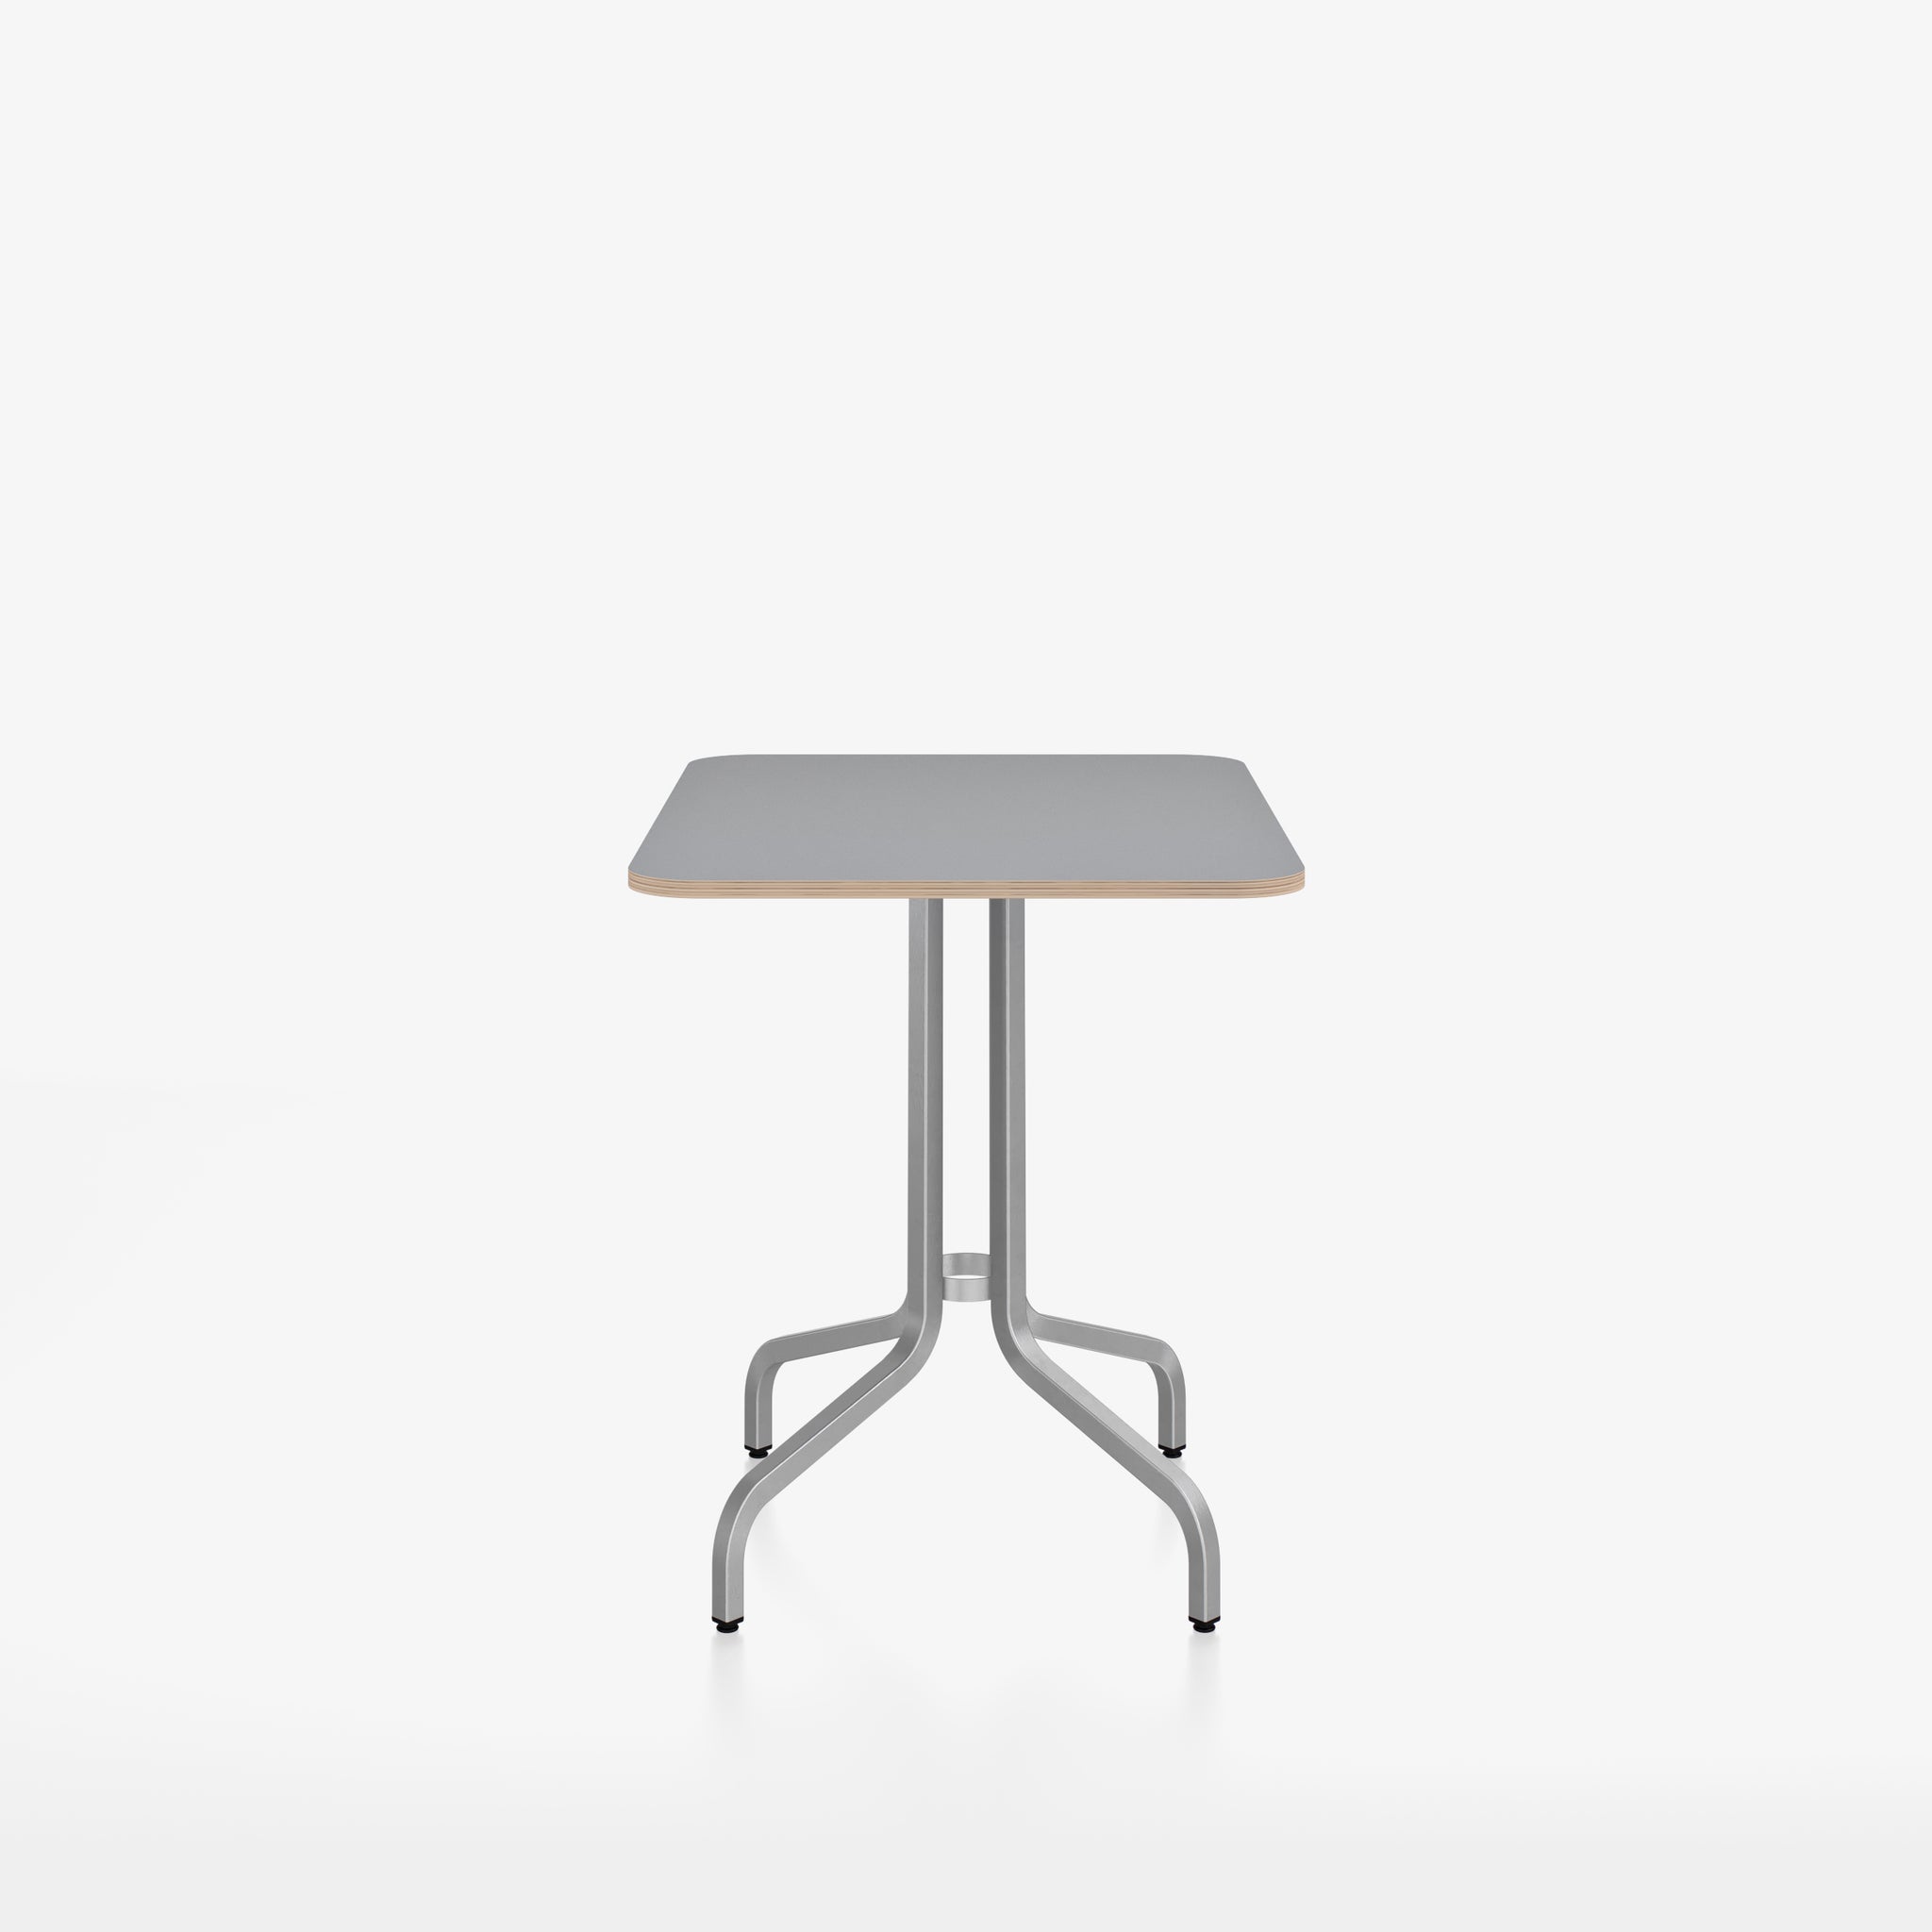 1 Inch Cafe Table